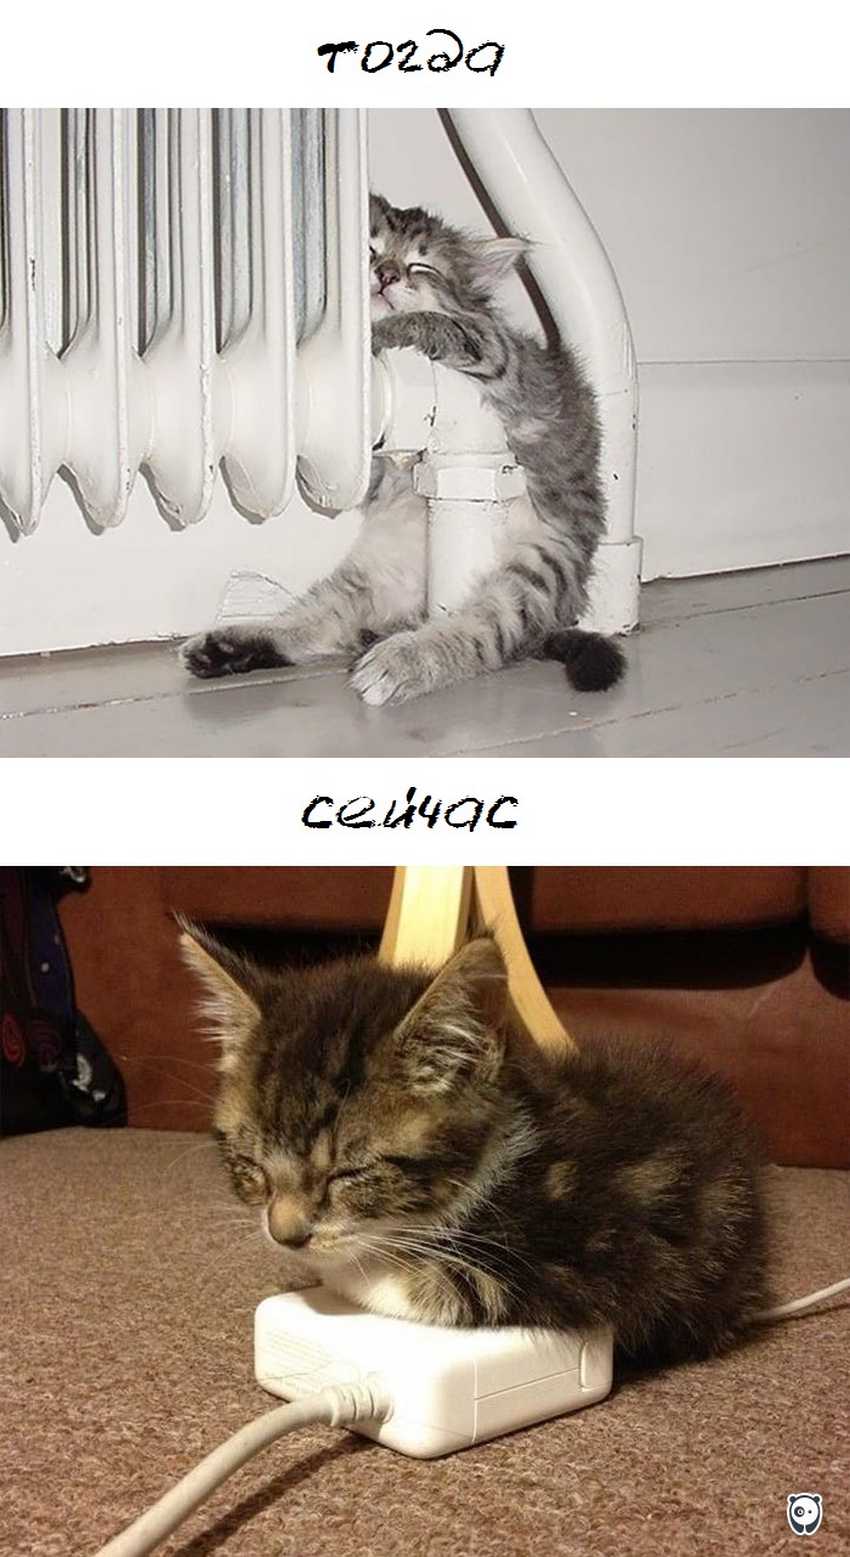 cats-then-now-funny-technology-change-life-9-57161749f2b9d__700